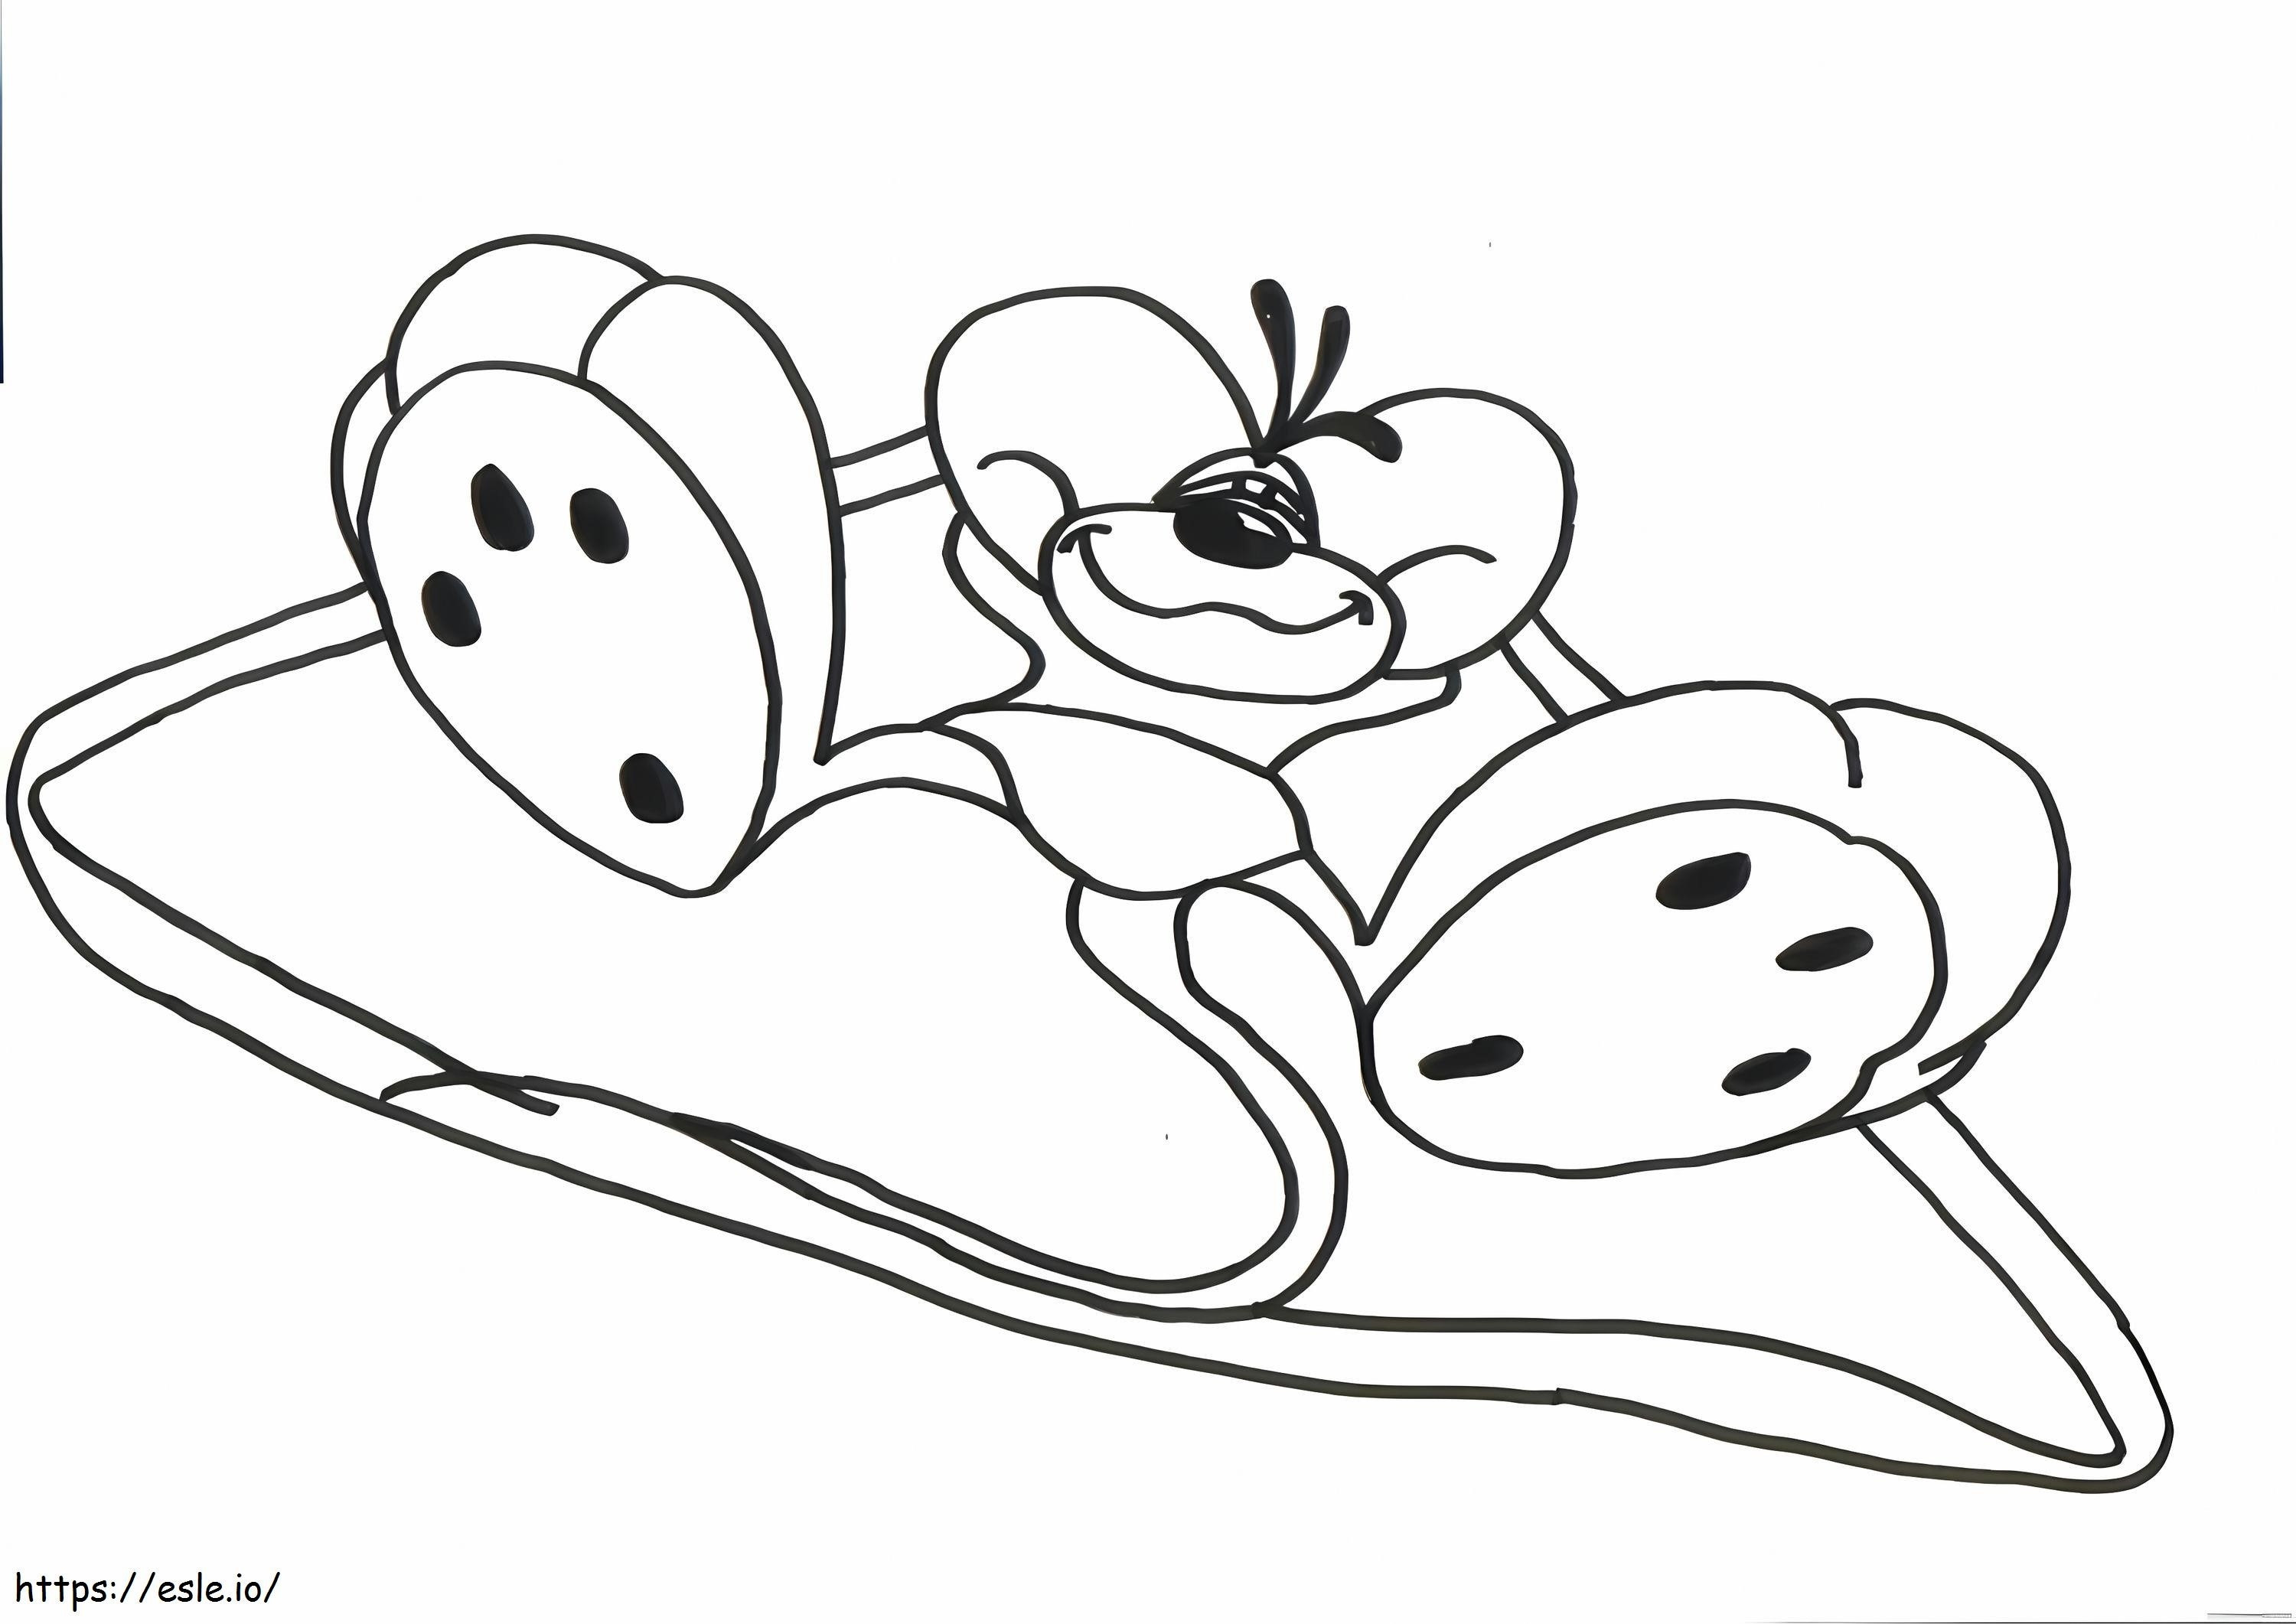 Diddl coloring page